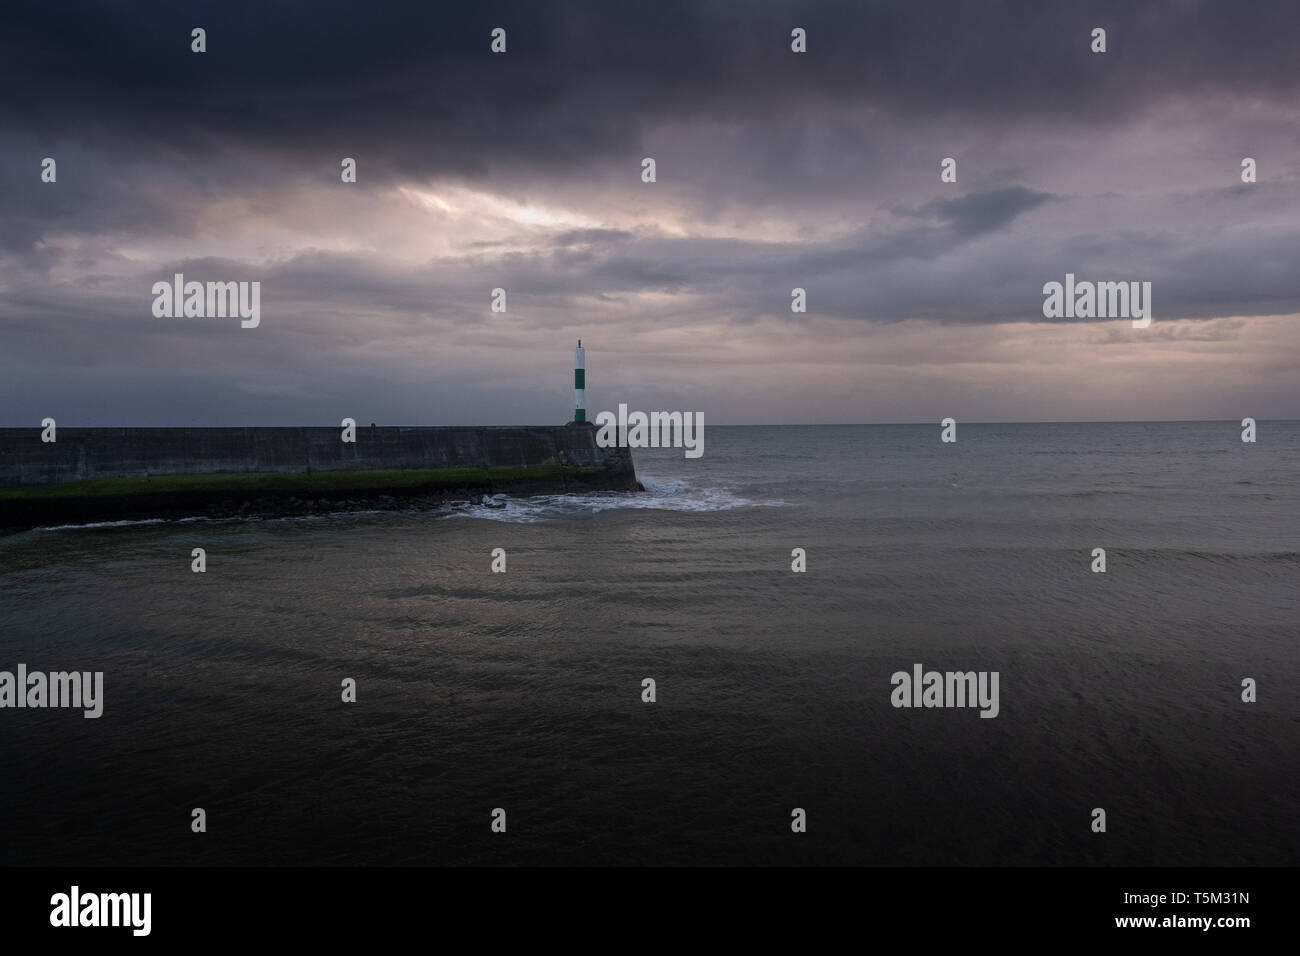 Aberystwyth Wales UK, Thursday 25 April 2019 UK Weather: Dark brooding clouds gather over Cardigan Bay at Aberystwyth, as the latest storm system, Storm Hannah, advances on the UK, bringing winds gusting up to 70mph to western areas this weekeng Photo Credit: keith morris/Alamy Live News Stock Photo